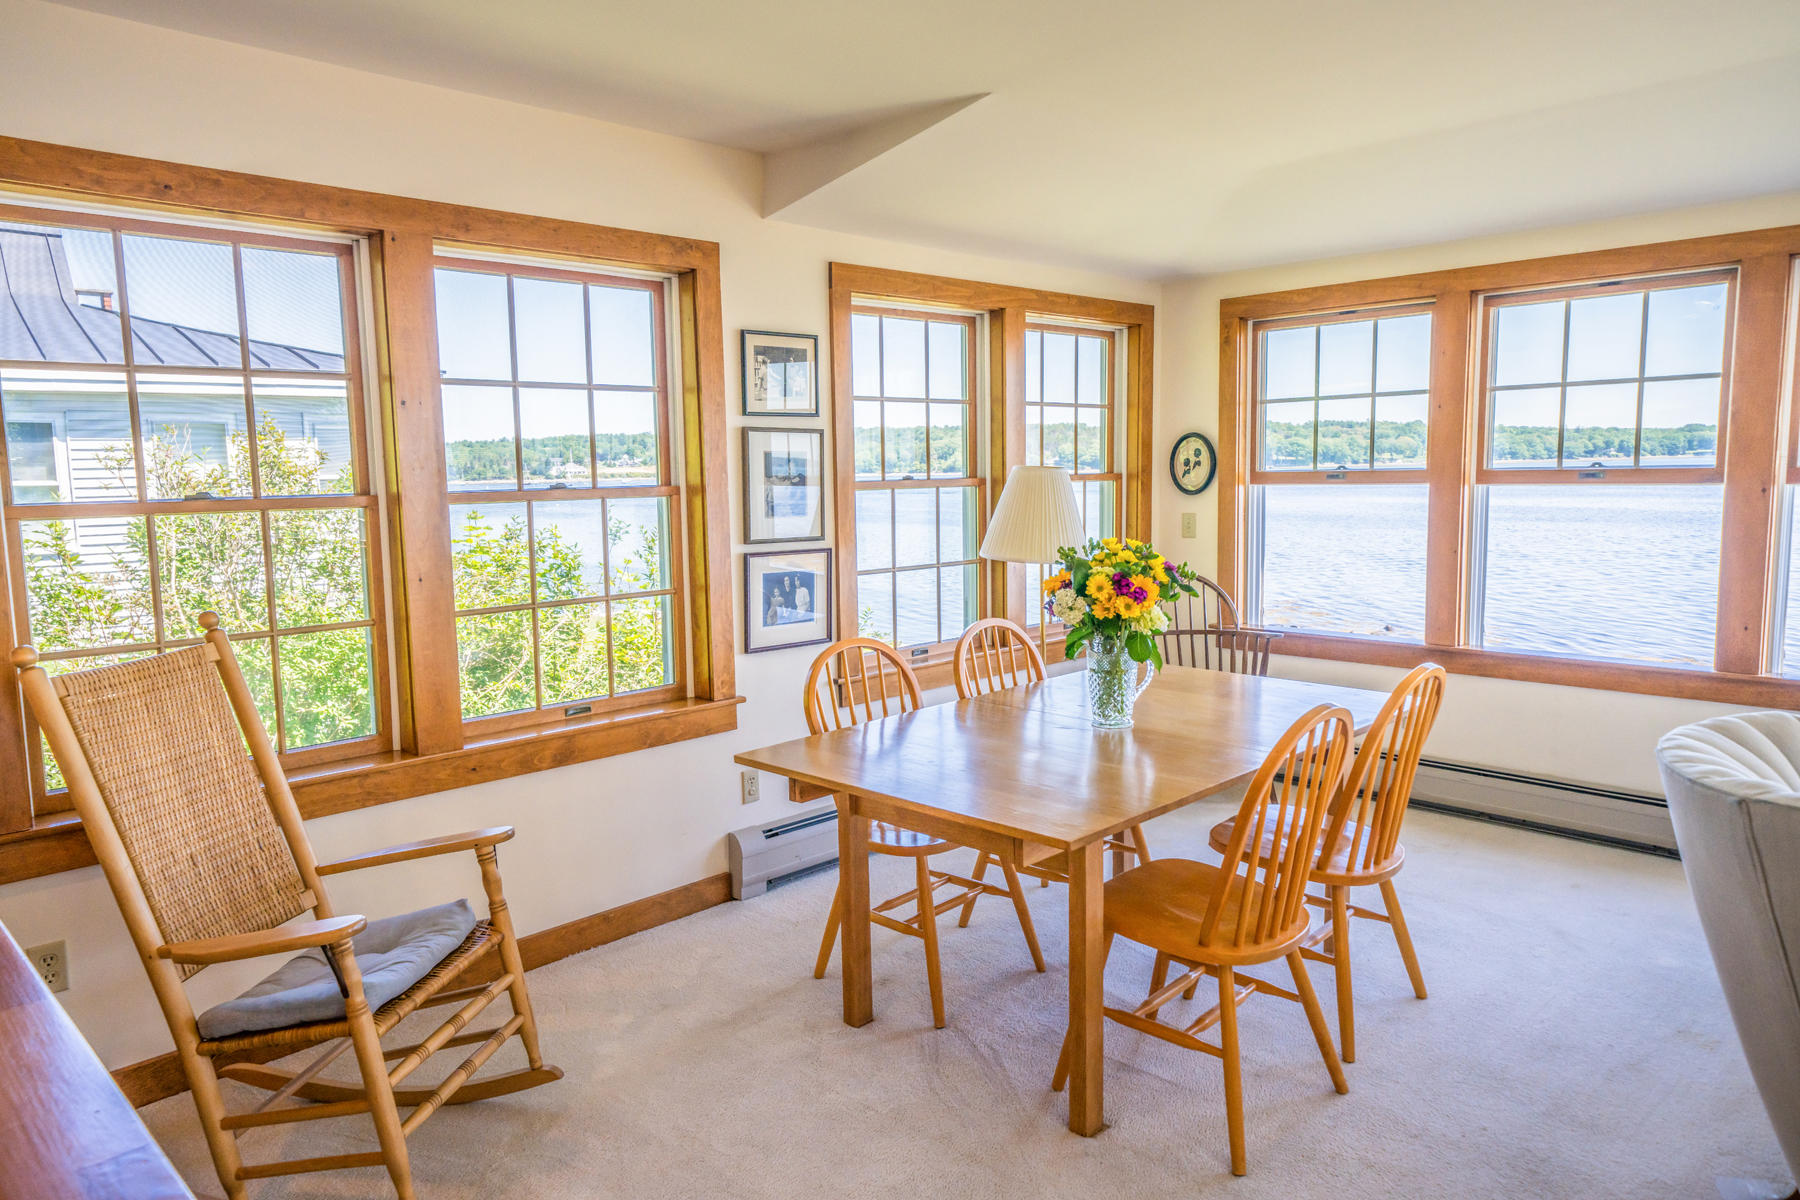 Maine Oceanfront Home at Water's Edge Located in one of Belfast's most desirable neighborhoods